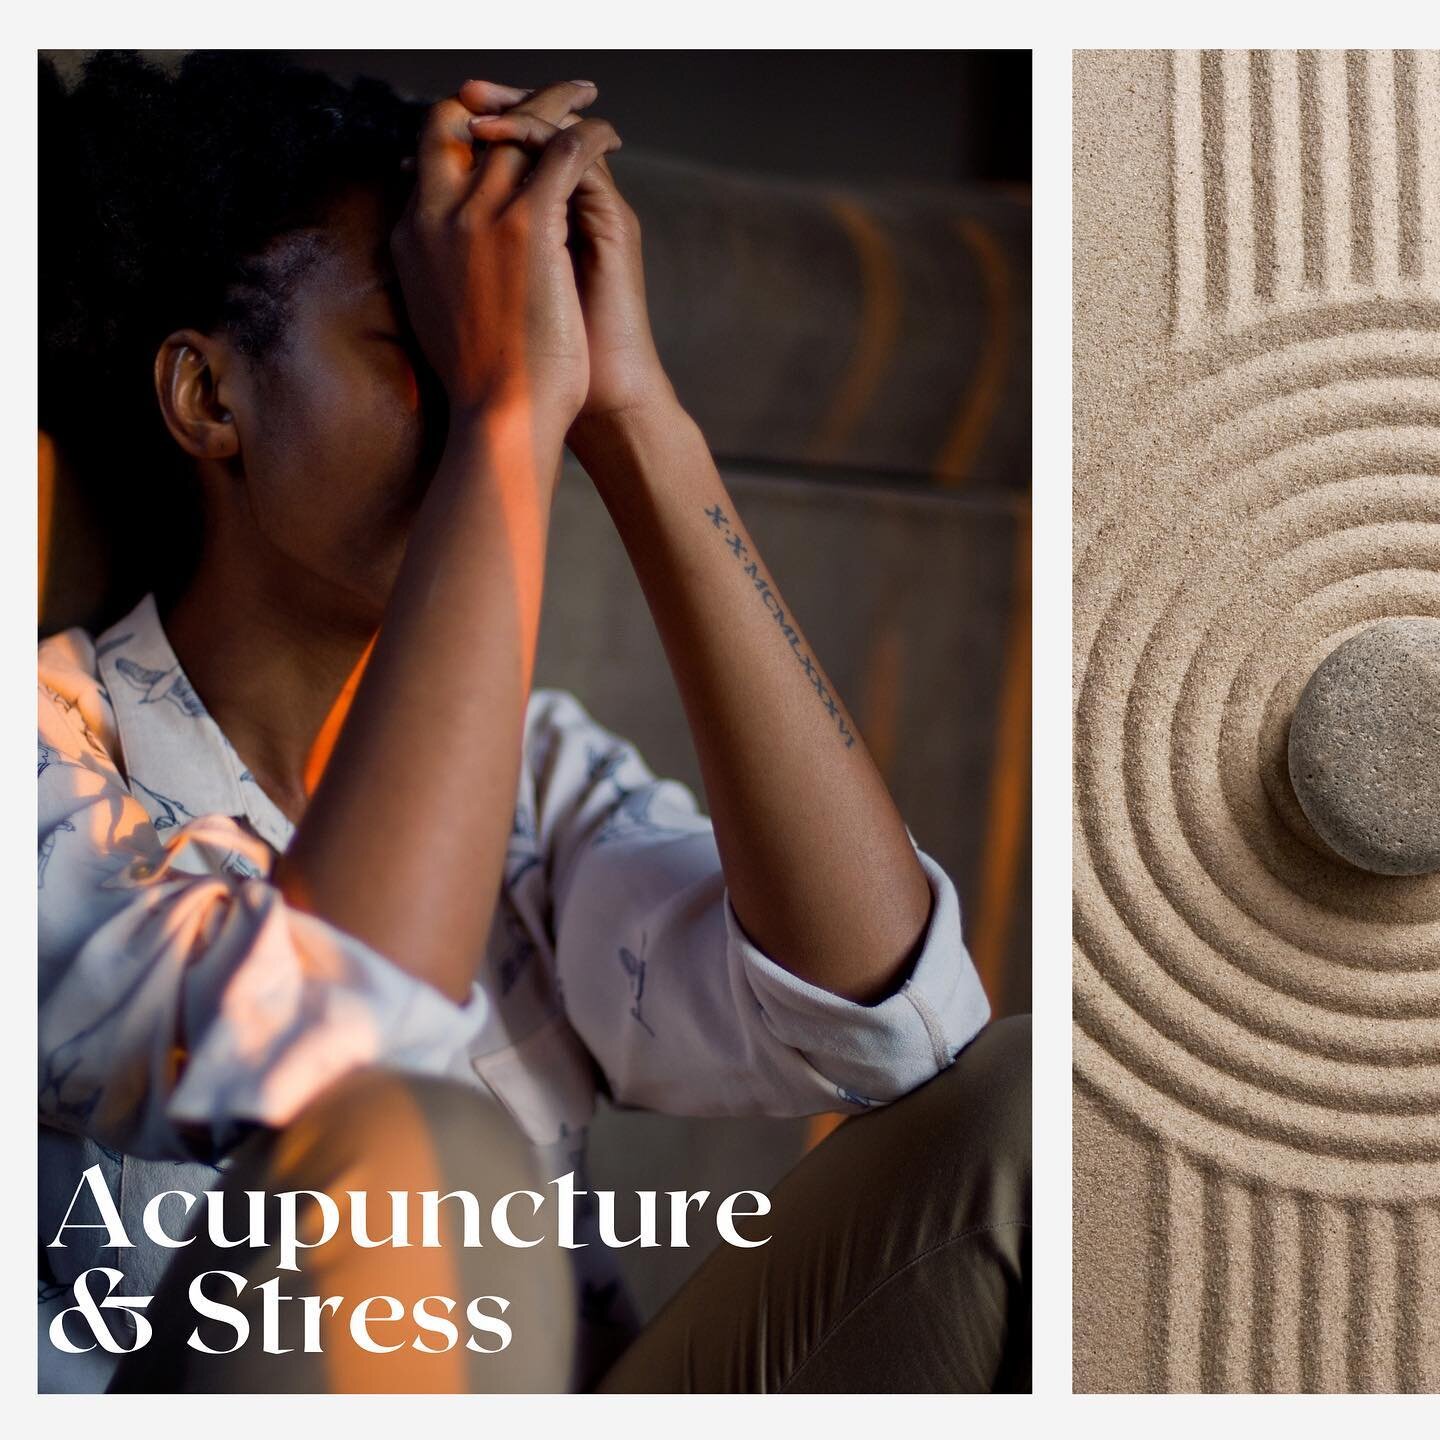 Feeling stressed out? We get it and we can help! 

Acupuncture is an effective and natural way to treat stress and anxiety. 

Come see us at CFA and find out how our custom treatments can help you.